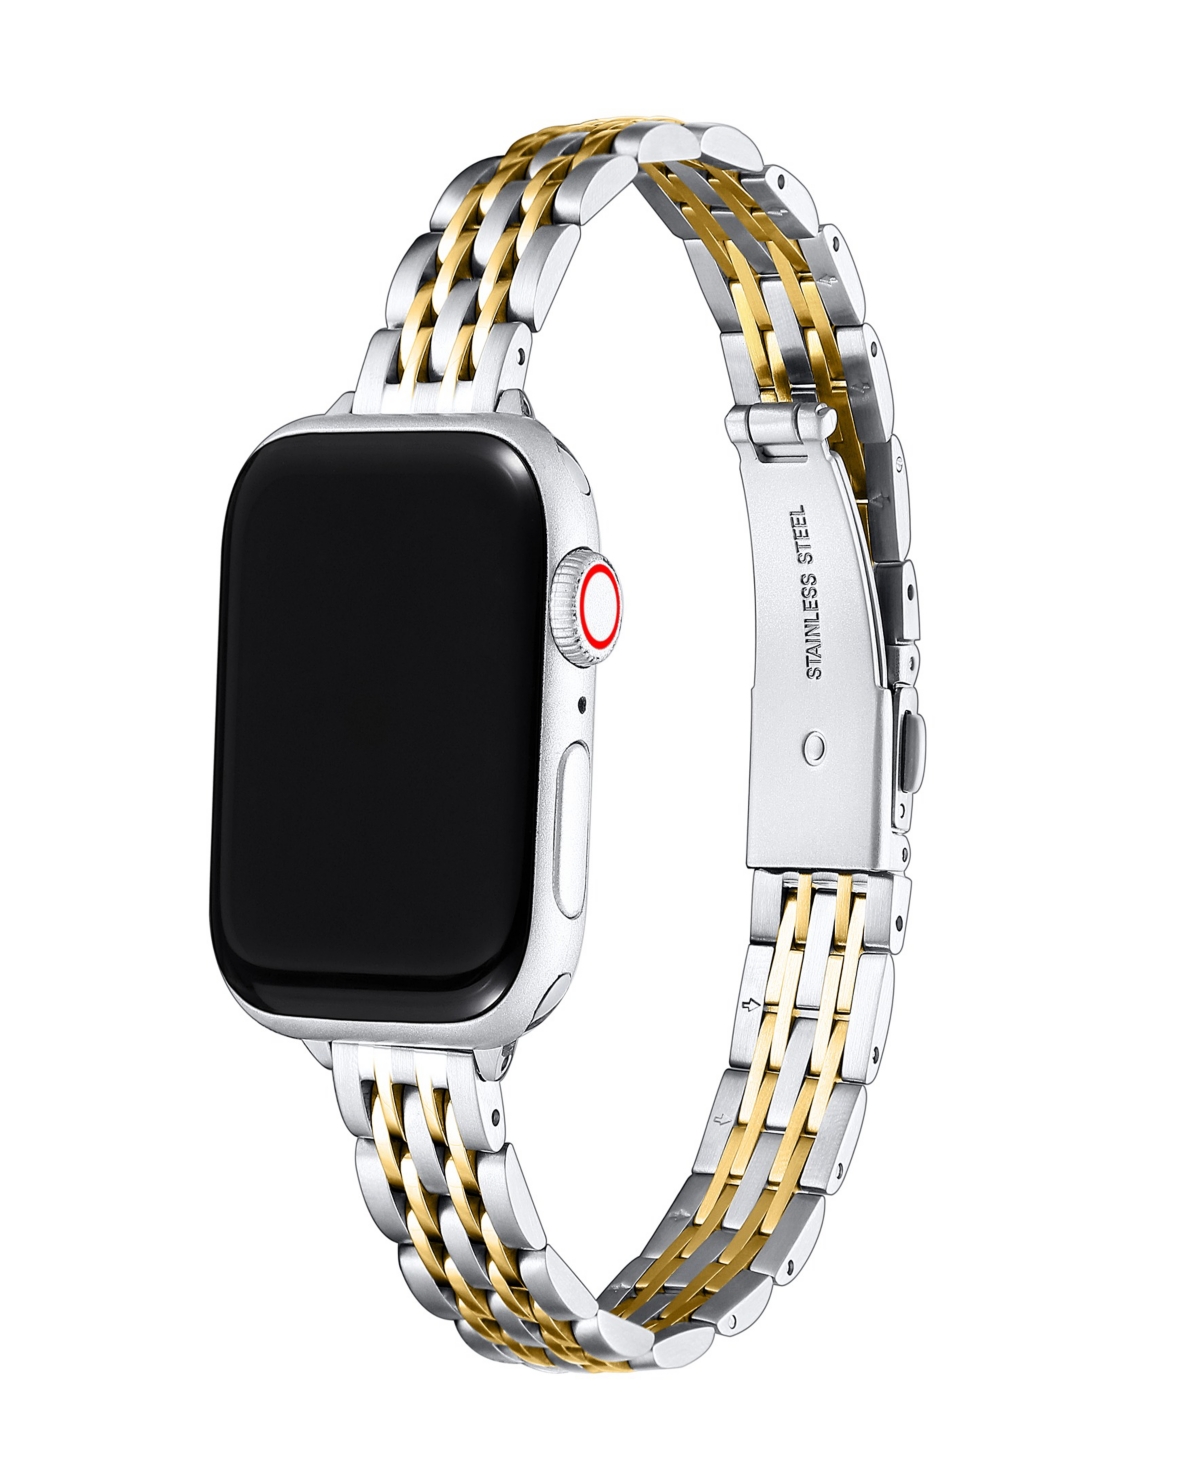 Unisex Skinny Rainey Stainless Steel Band for Apple Watch Size- 38mm, 40mm, 41mm - Two Tone